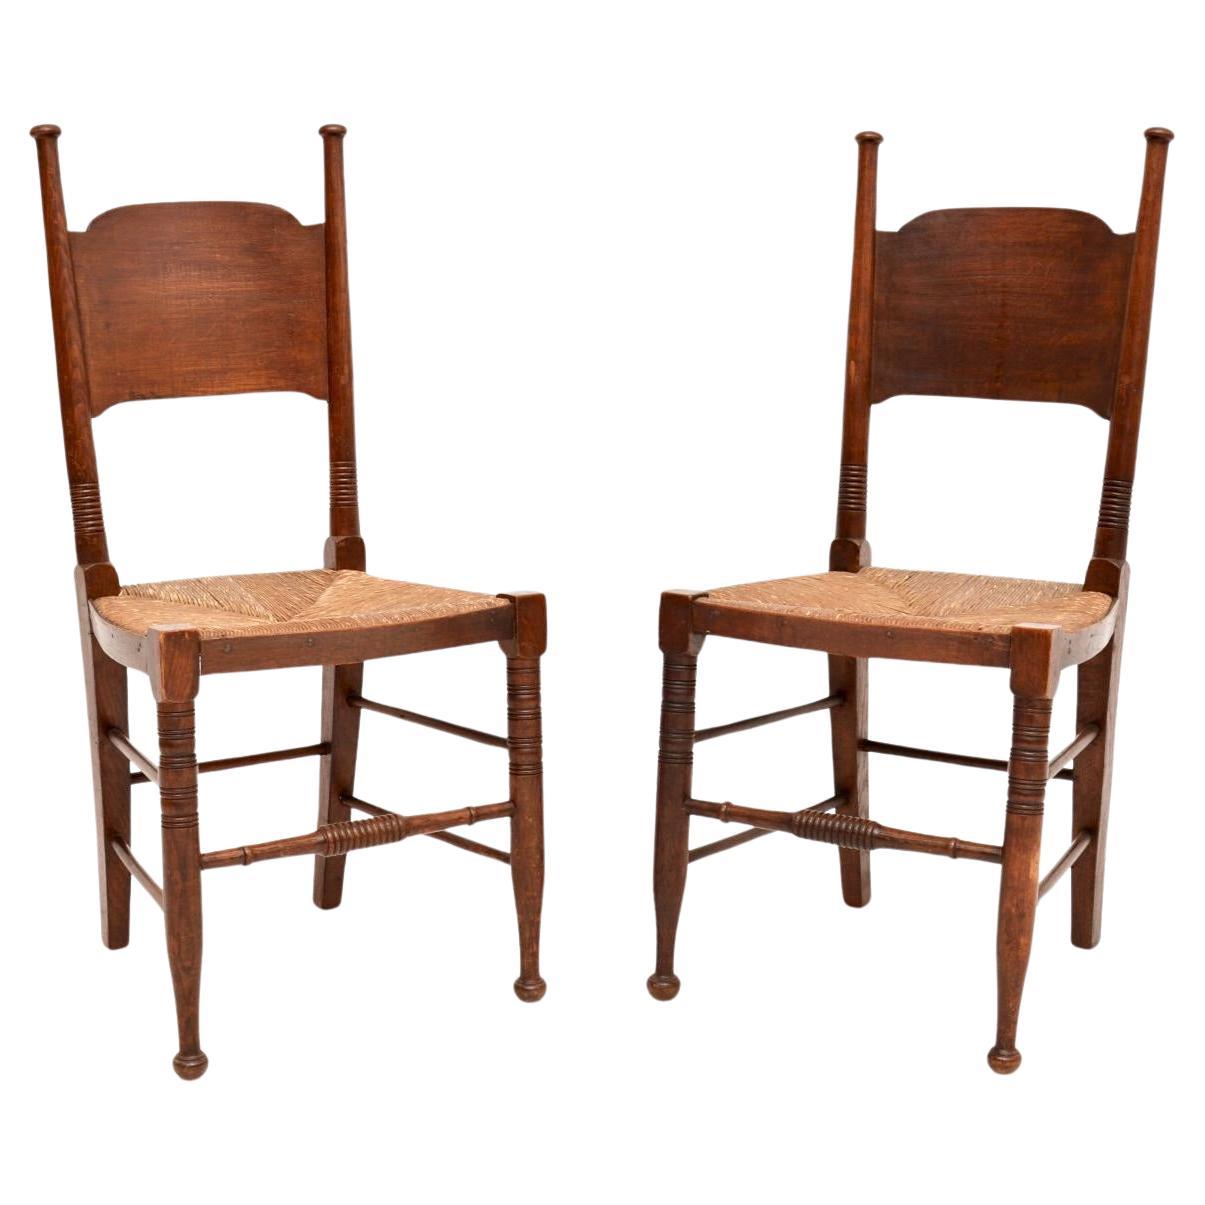 Pair of Antique Arts and Crafts Side Chairs by William Birch